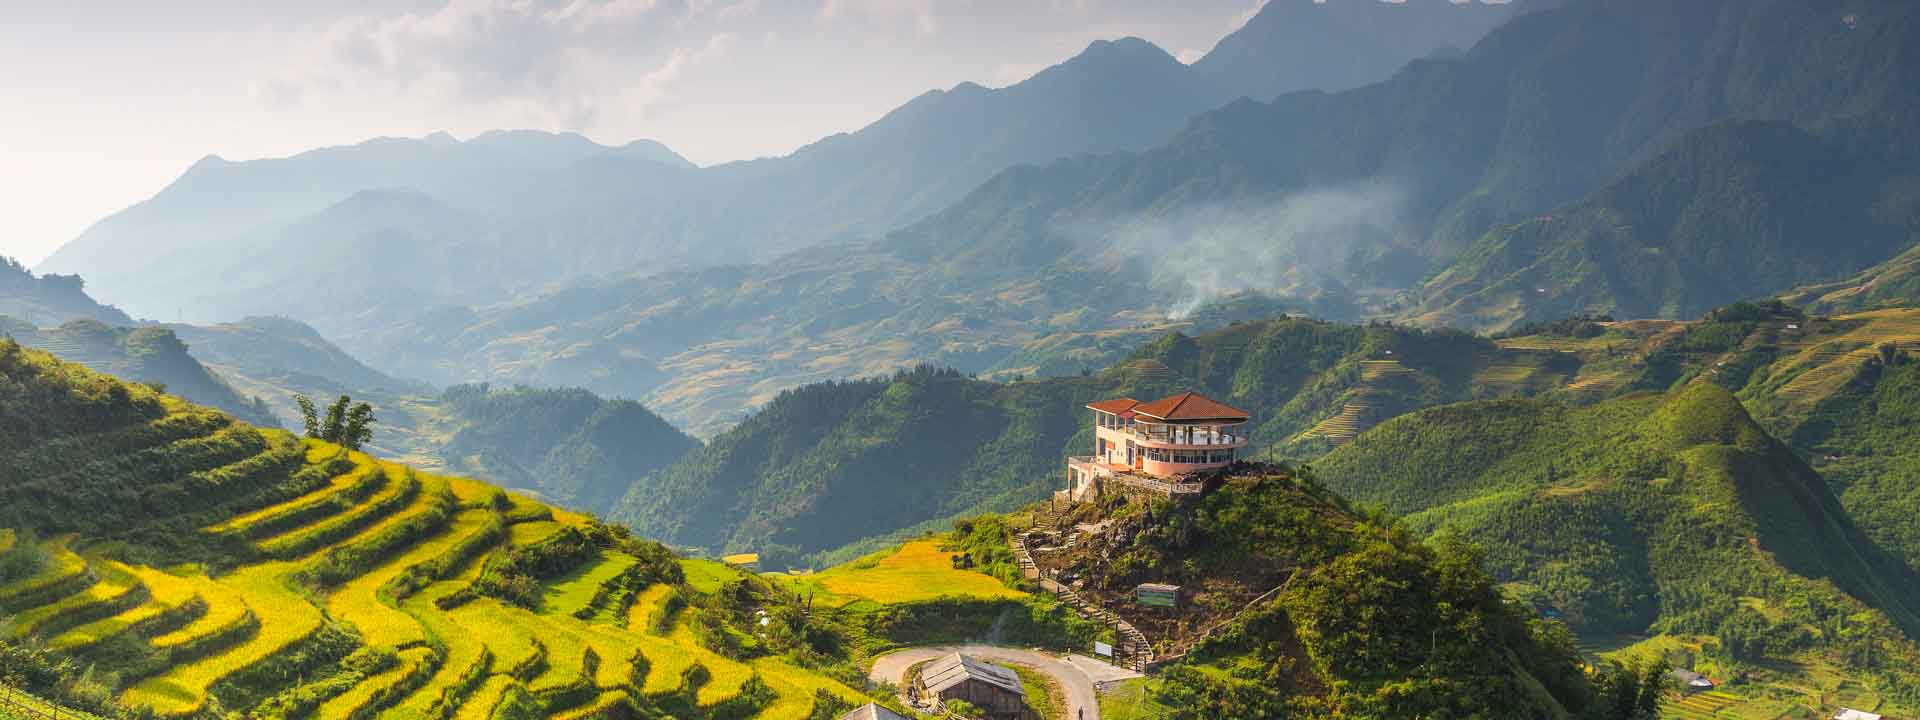 Discover The Hidden Treasures of Vietnam by Road 29 days